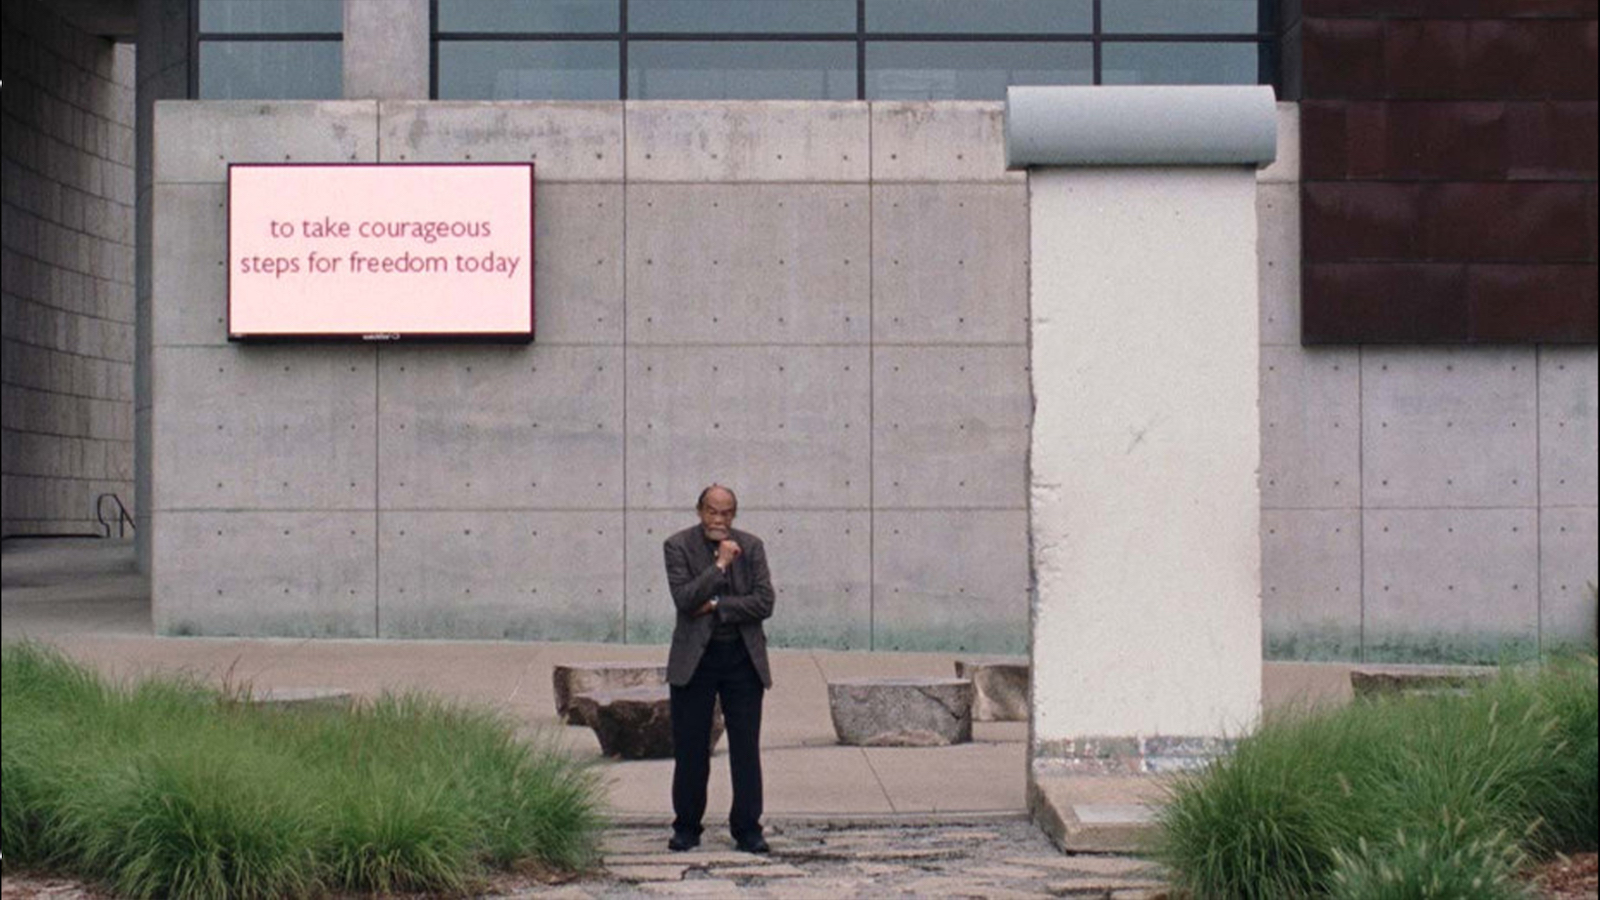 A man stands A man stands in front of a concrete building in front of a sign that says "to take courageous steps for freedom today"